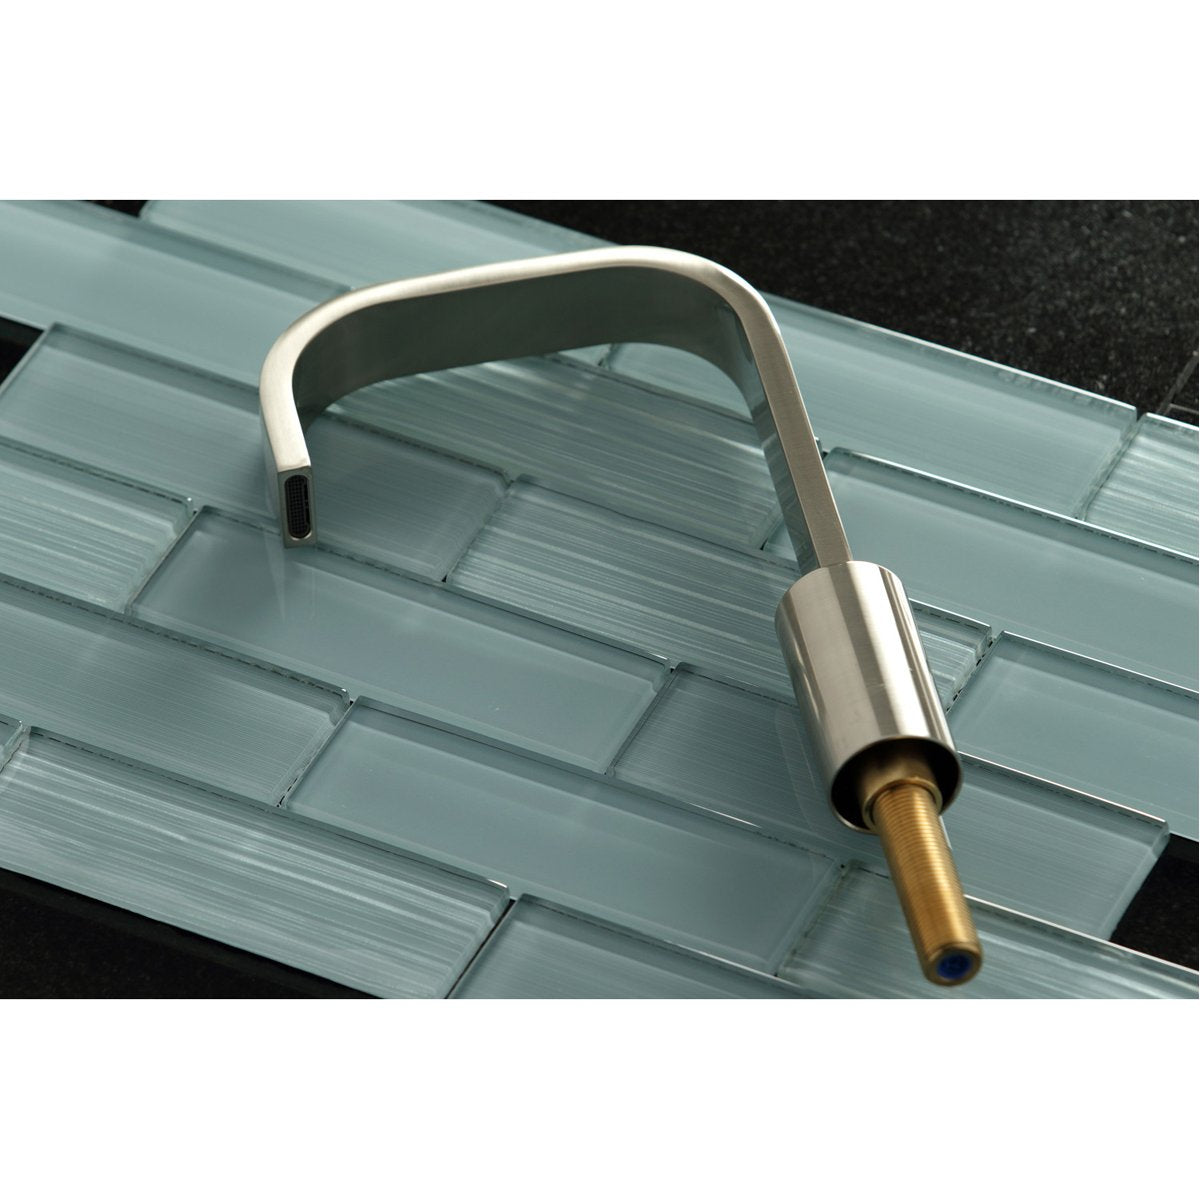 Kingston Brass Concord Fauceture 3-Hole 8-Inch Widespread Bathroom Faucet